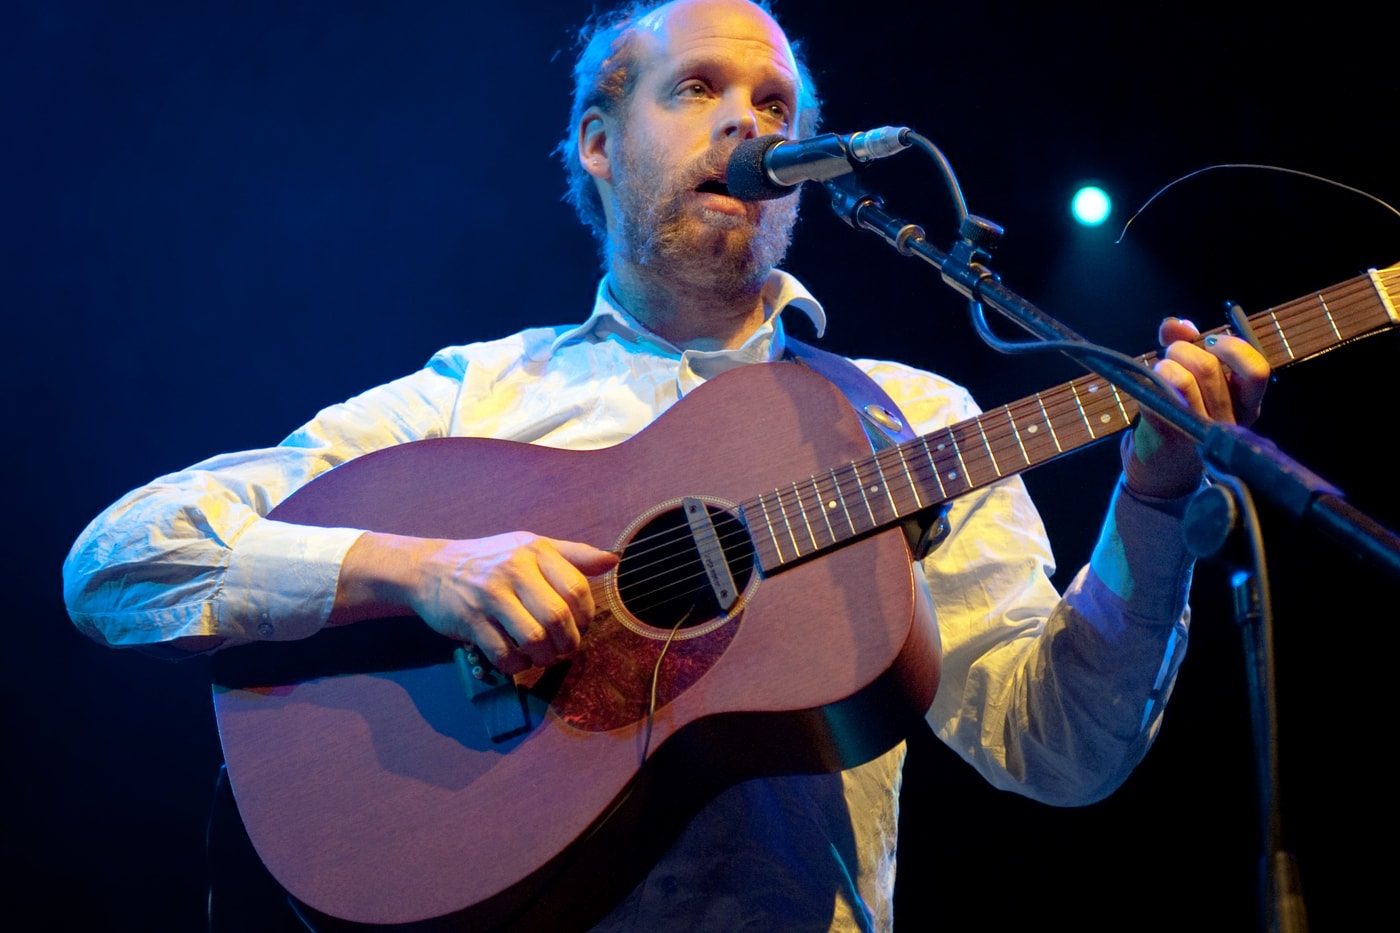 bonnie-prince-billys-cover-of-princes-the-cross-is-phenomenal